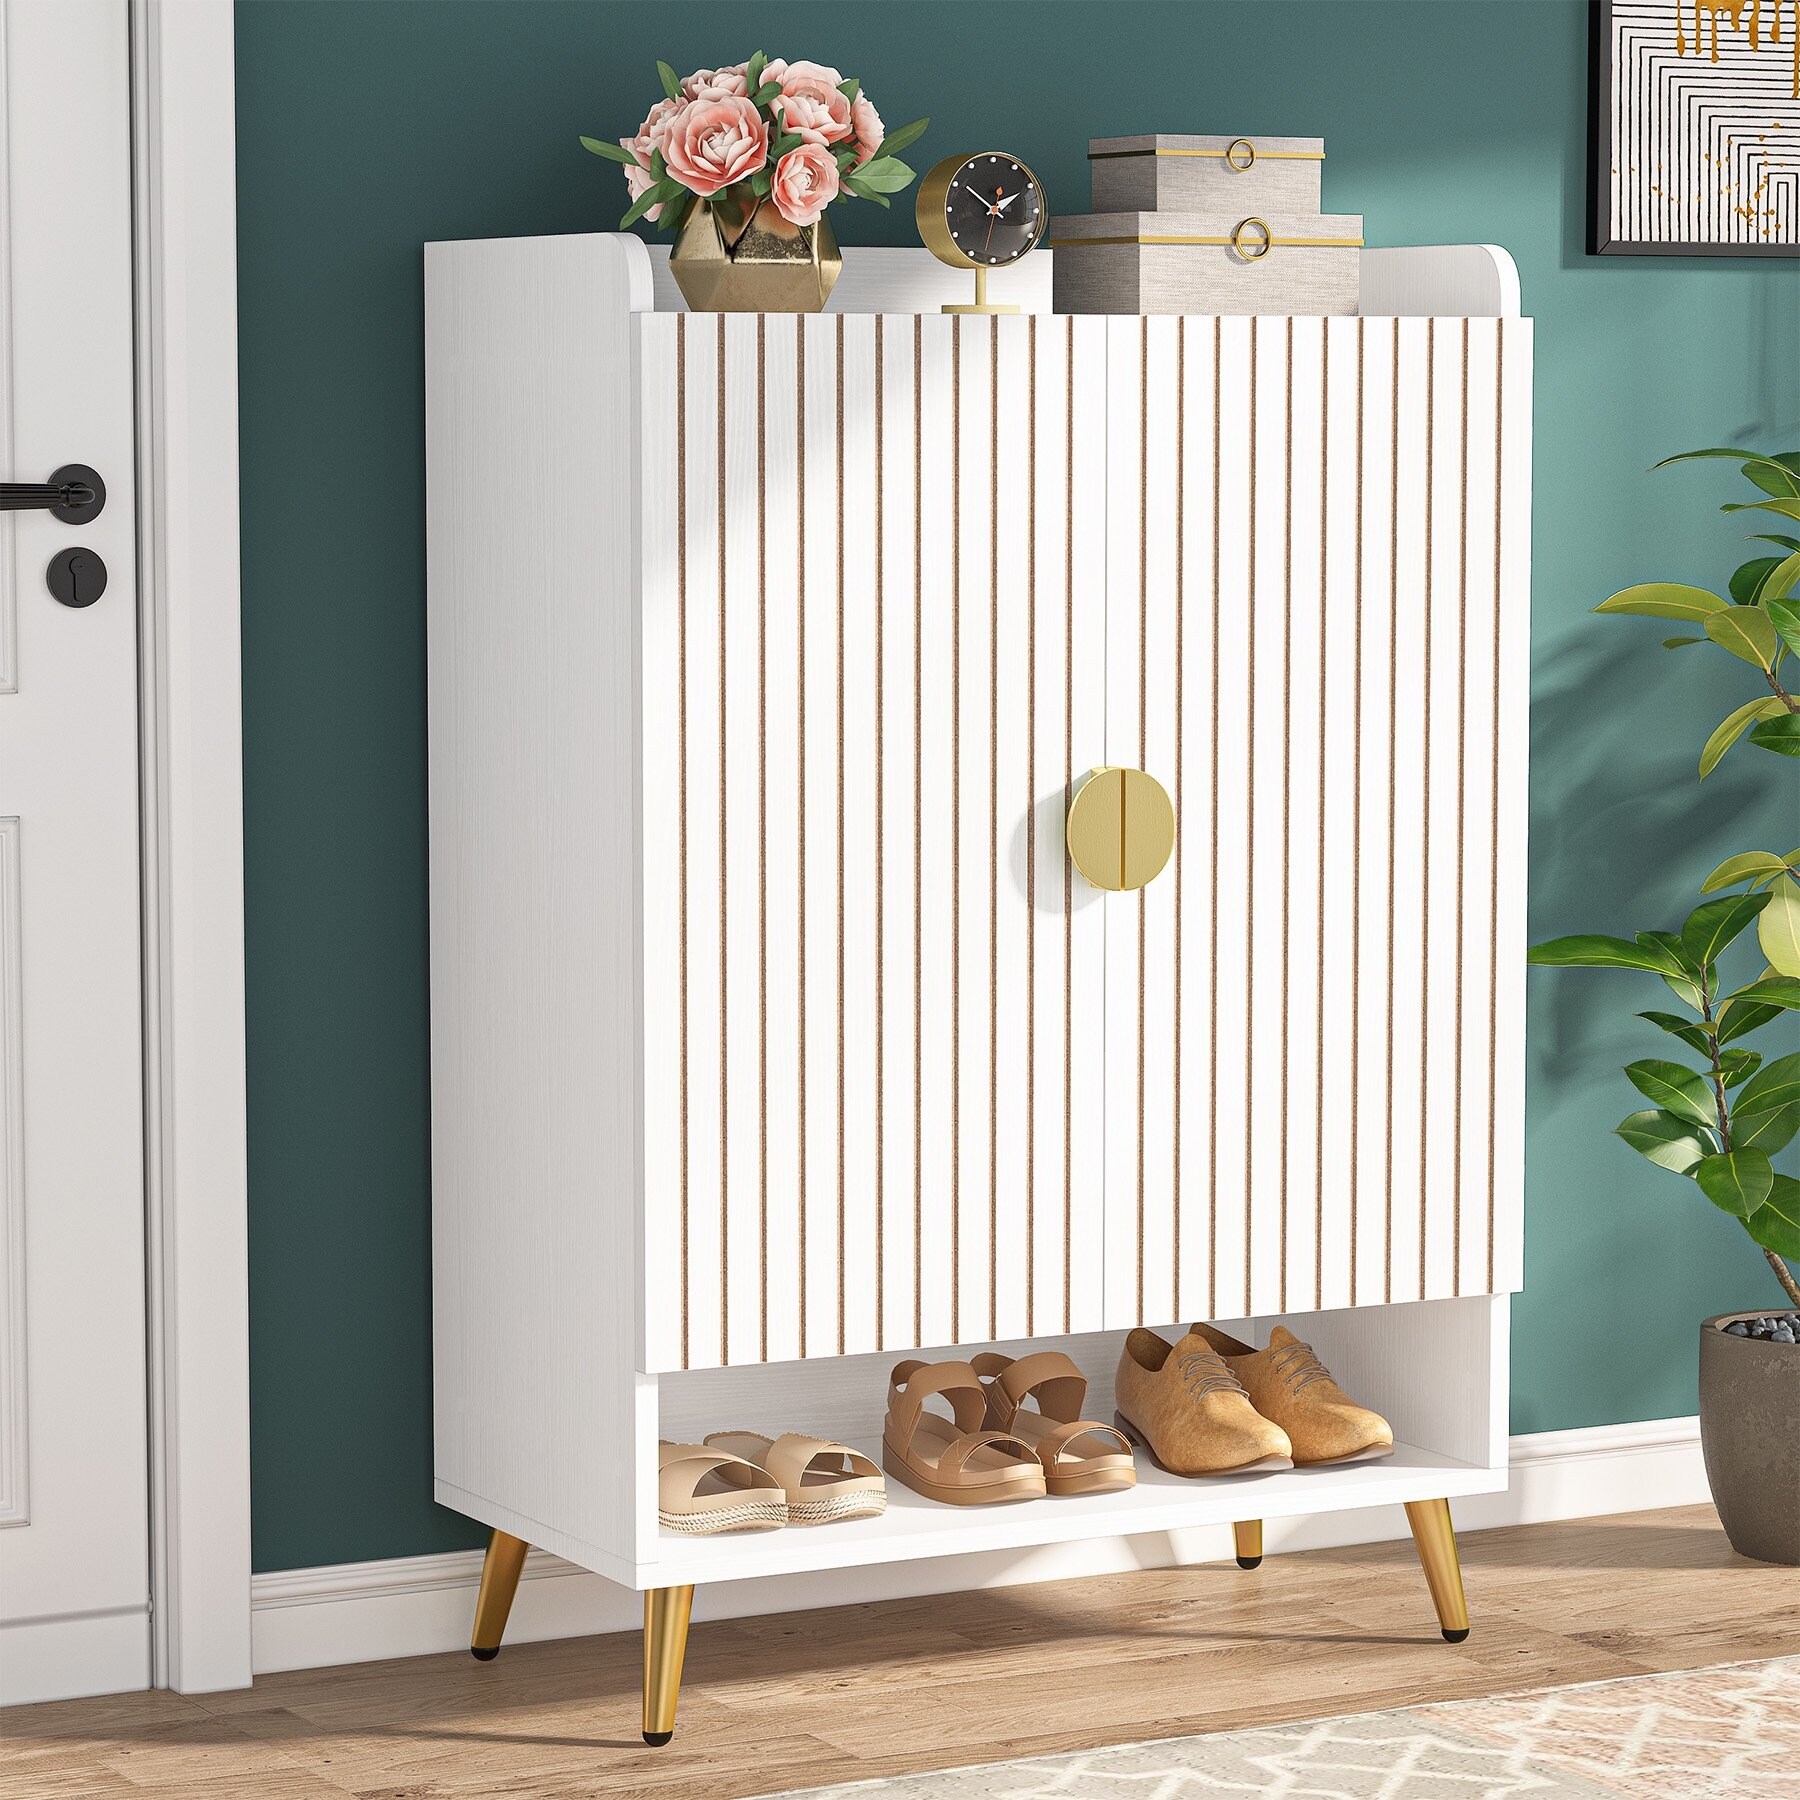 https://ak1.ostkcdn.com/images/products/is/images/direct/6df1286ac41a3fc99ed73d0e6d3f93aa24b7b420/Shoe-Cabinet-with-Doors%2C-7-Tier-Shoe-Storage-Cabinet-for-Entryway.jpg